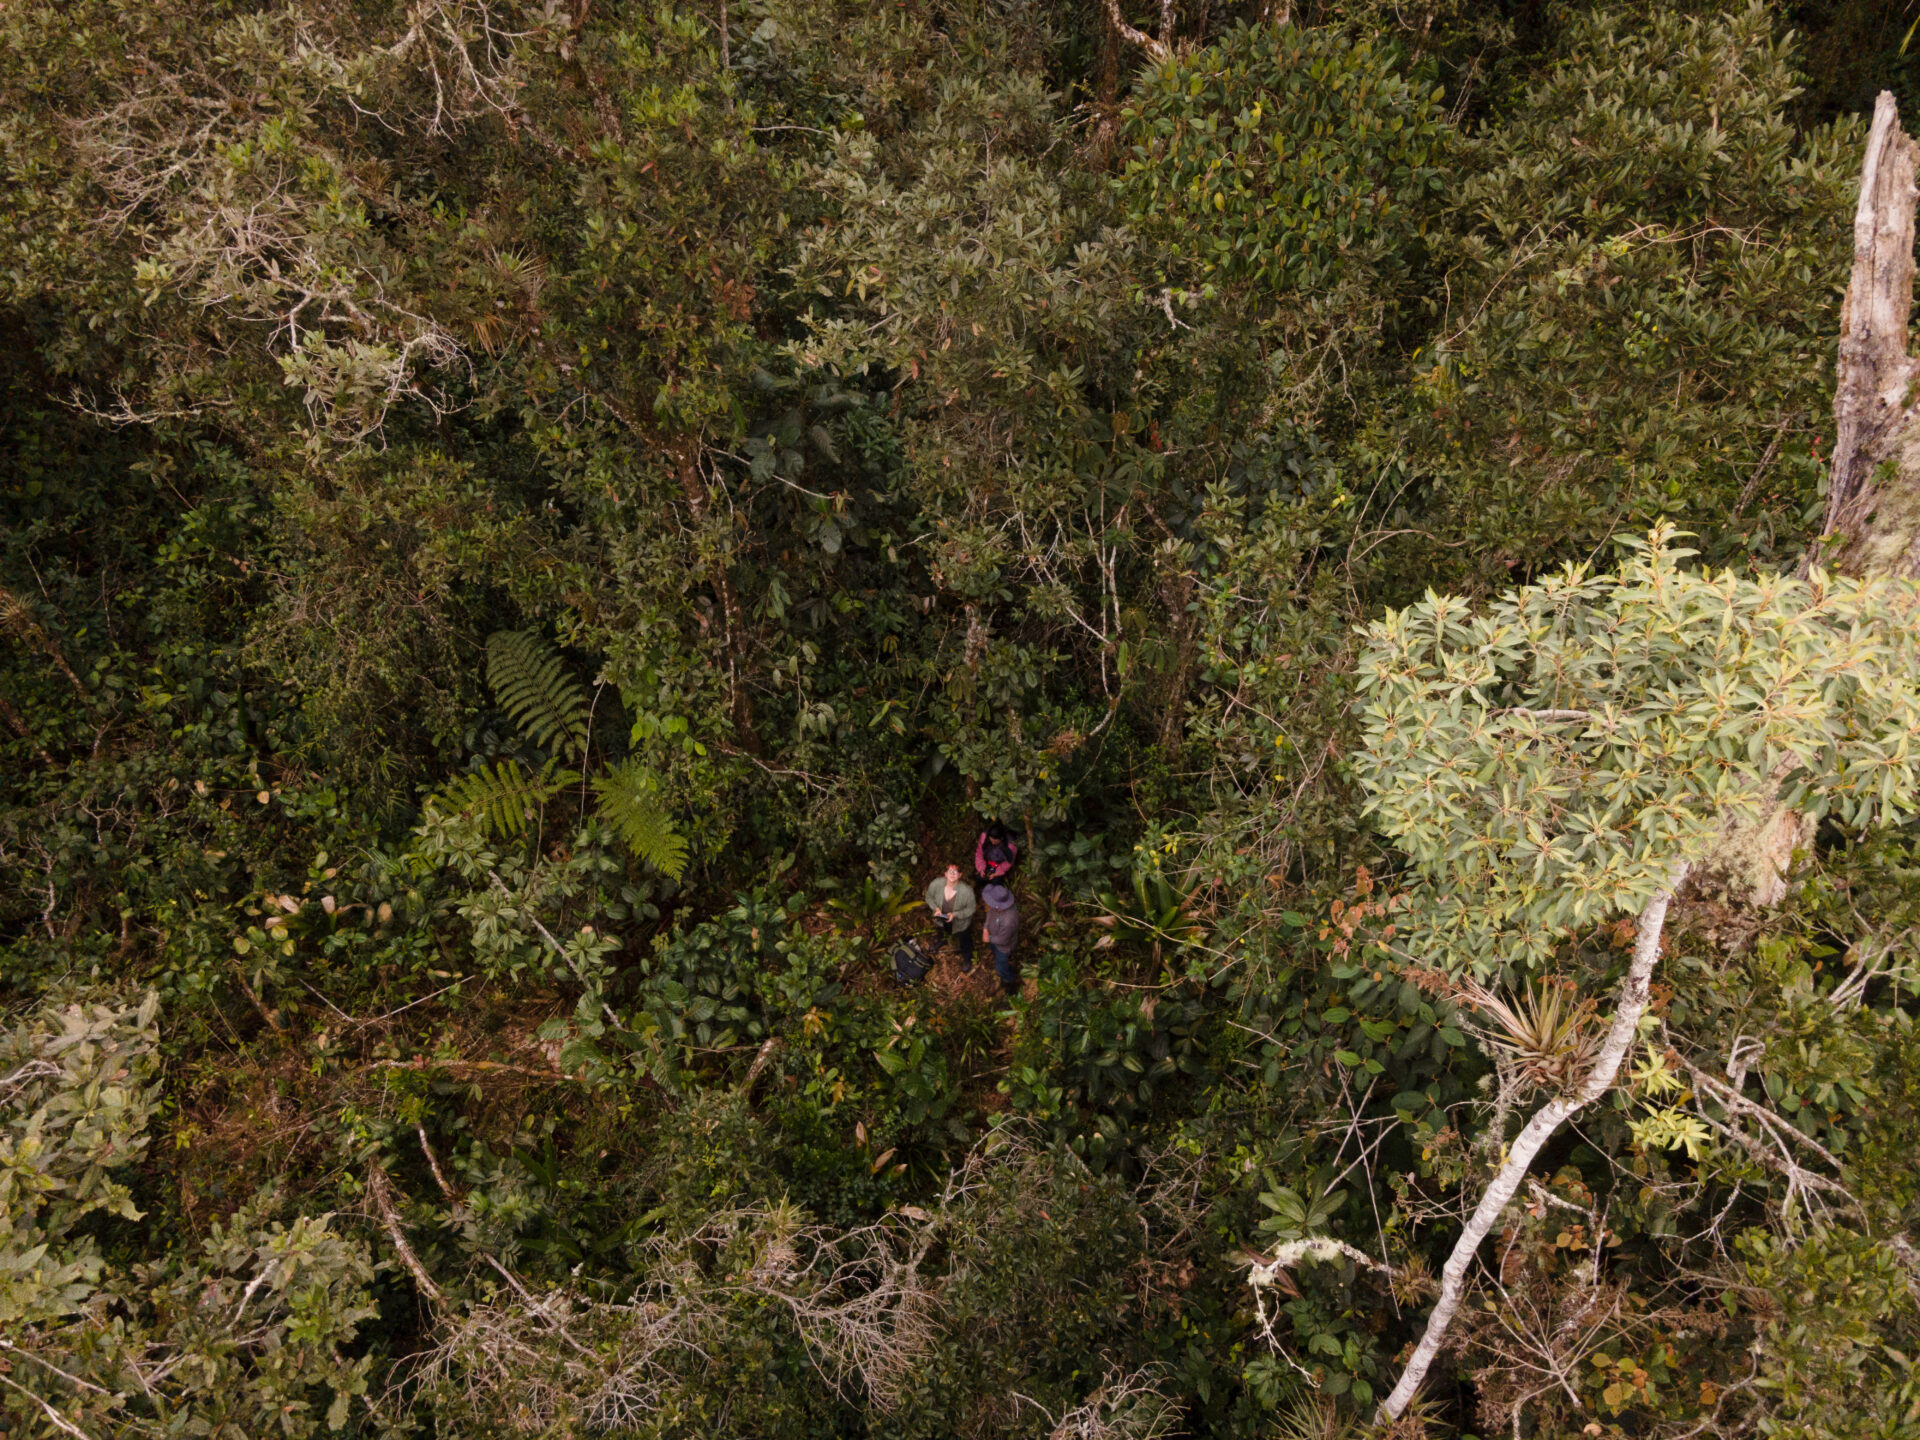 A bird's eye view of a dense forest from above.